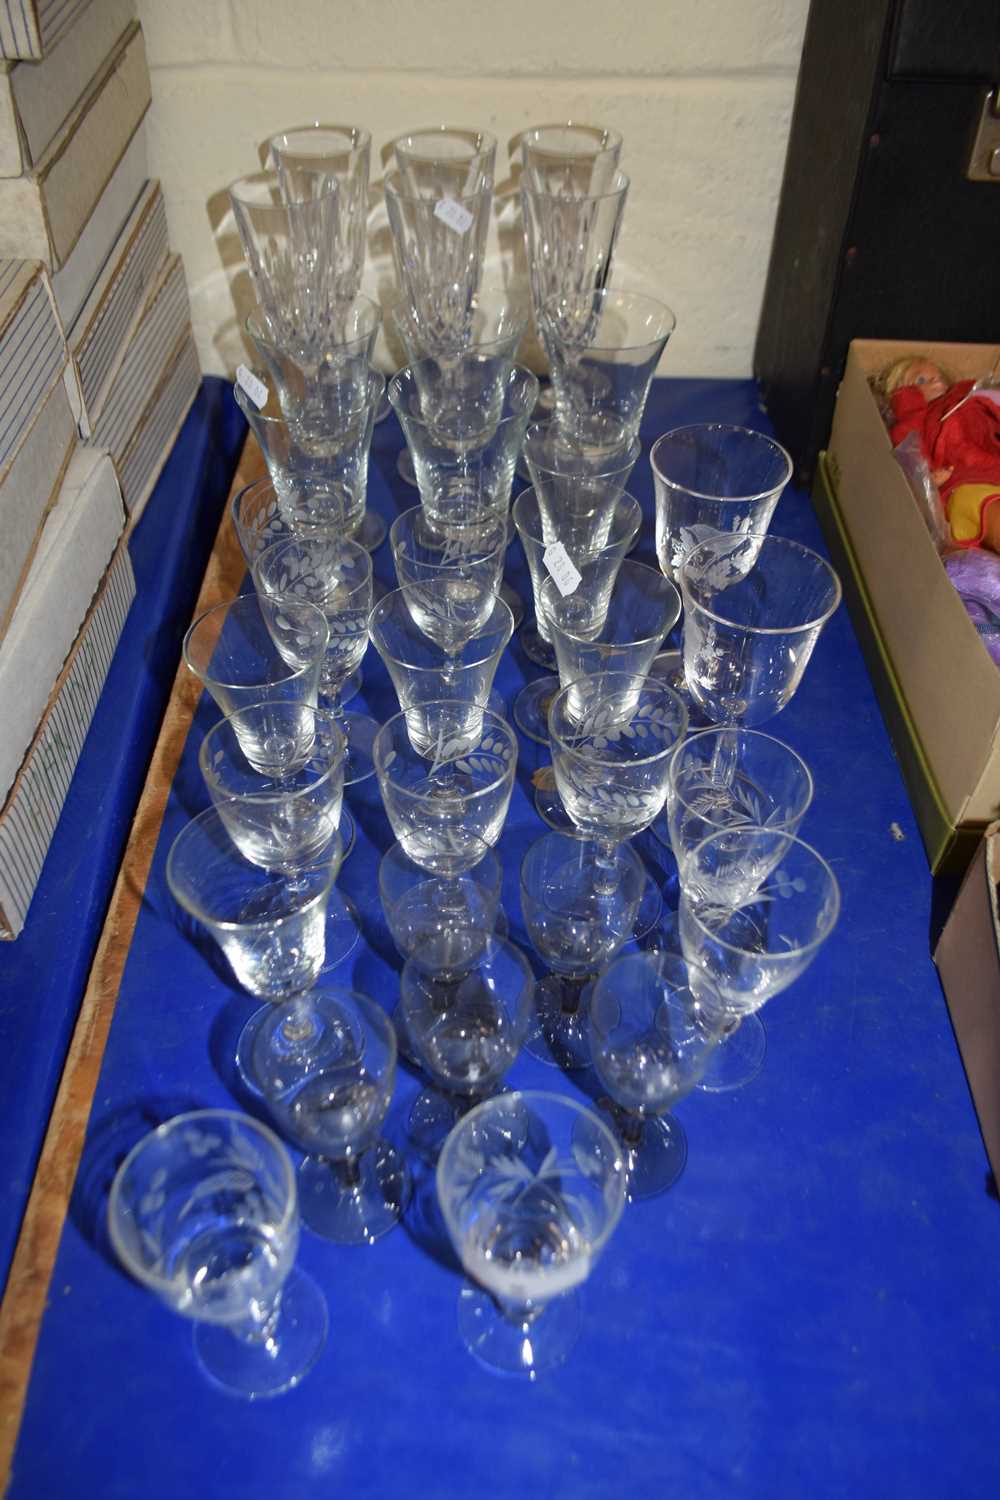 QUANTITY OF MIXED DRINKING GLASSES